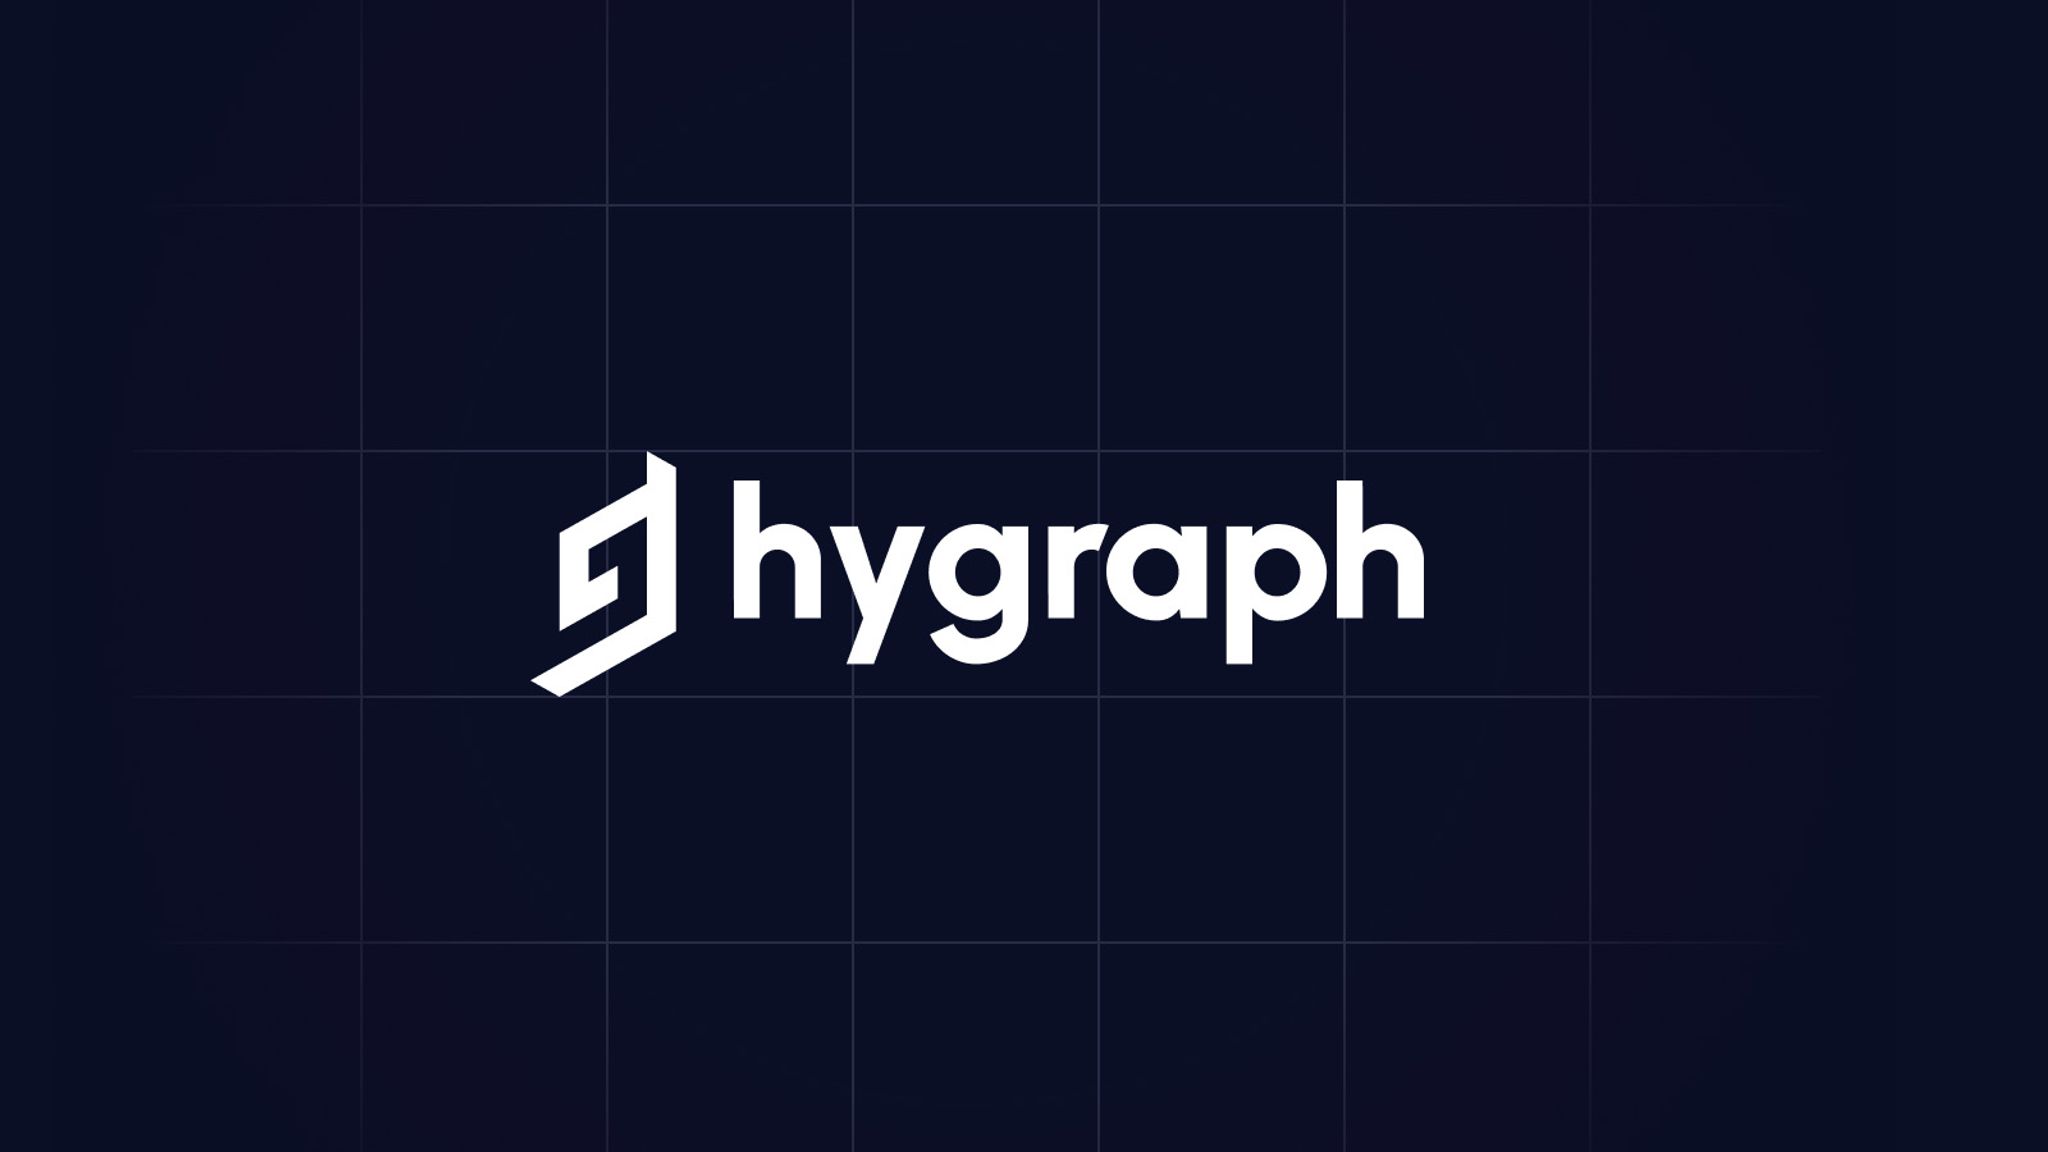 Image of new Hygraph logo against a dark background with a graph pattern